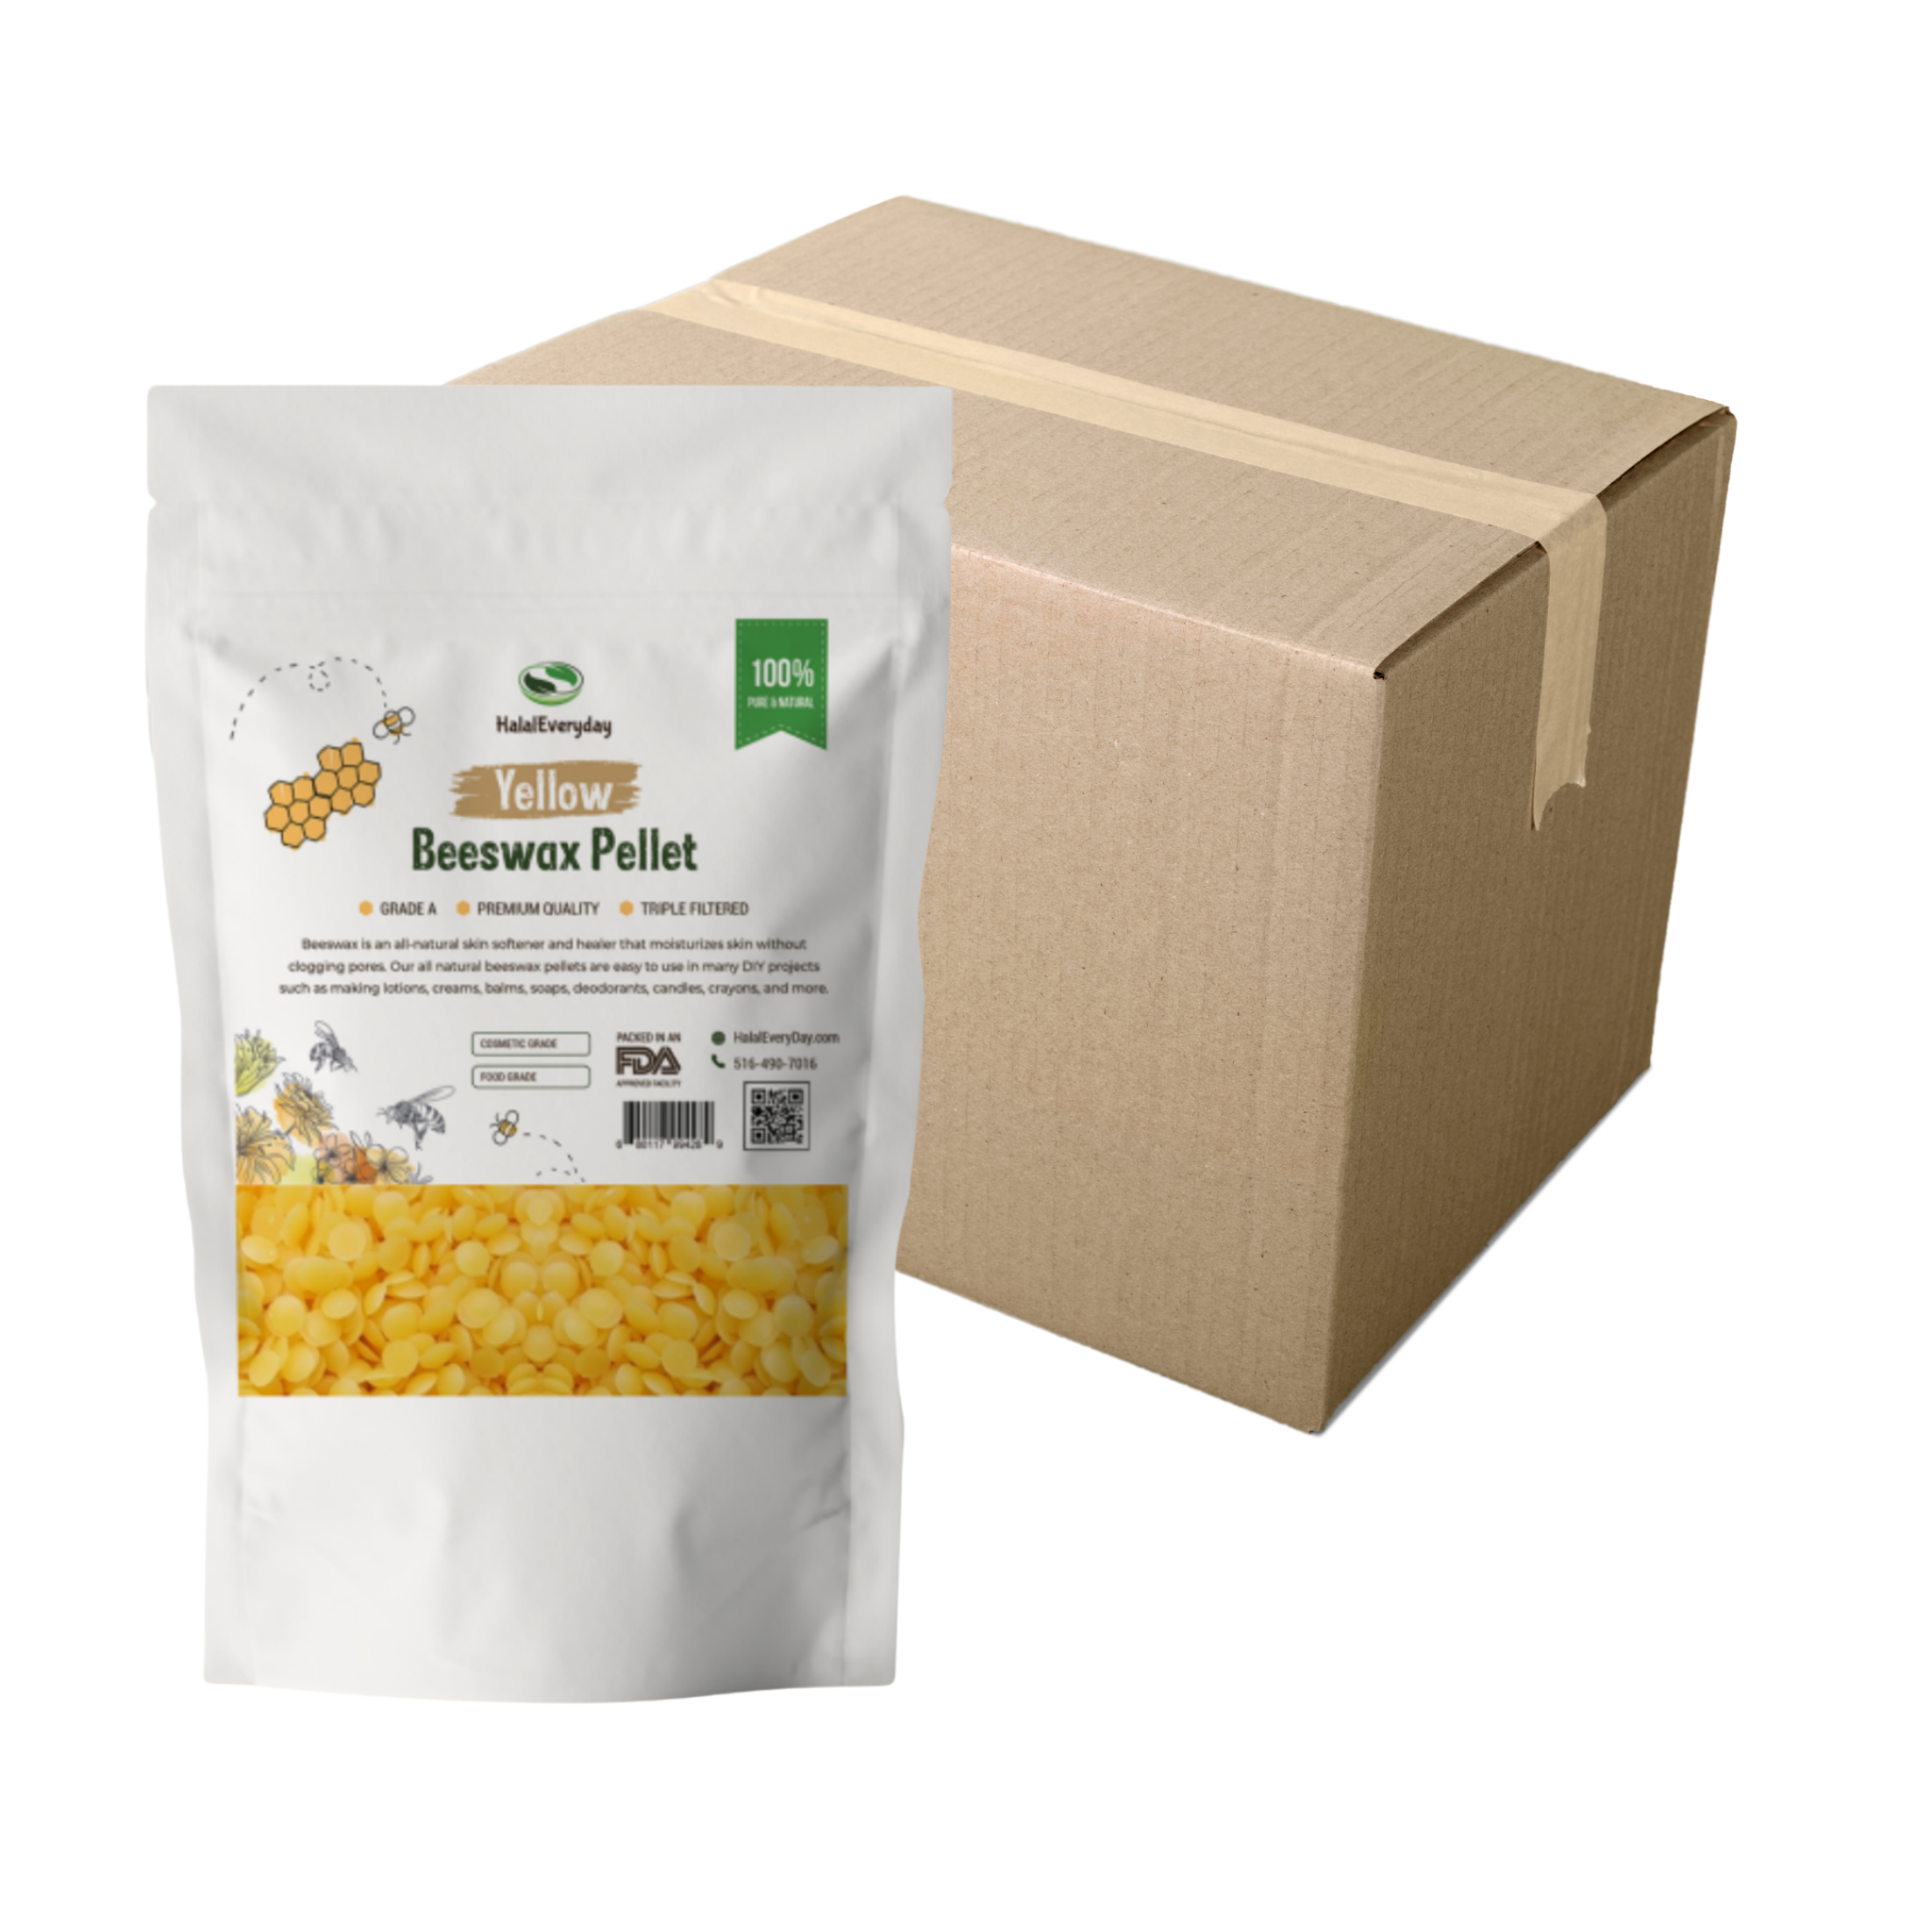 Beeswax Granules Pearls Pastilles Pellets Yellow 100% Pure Food